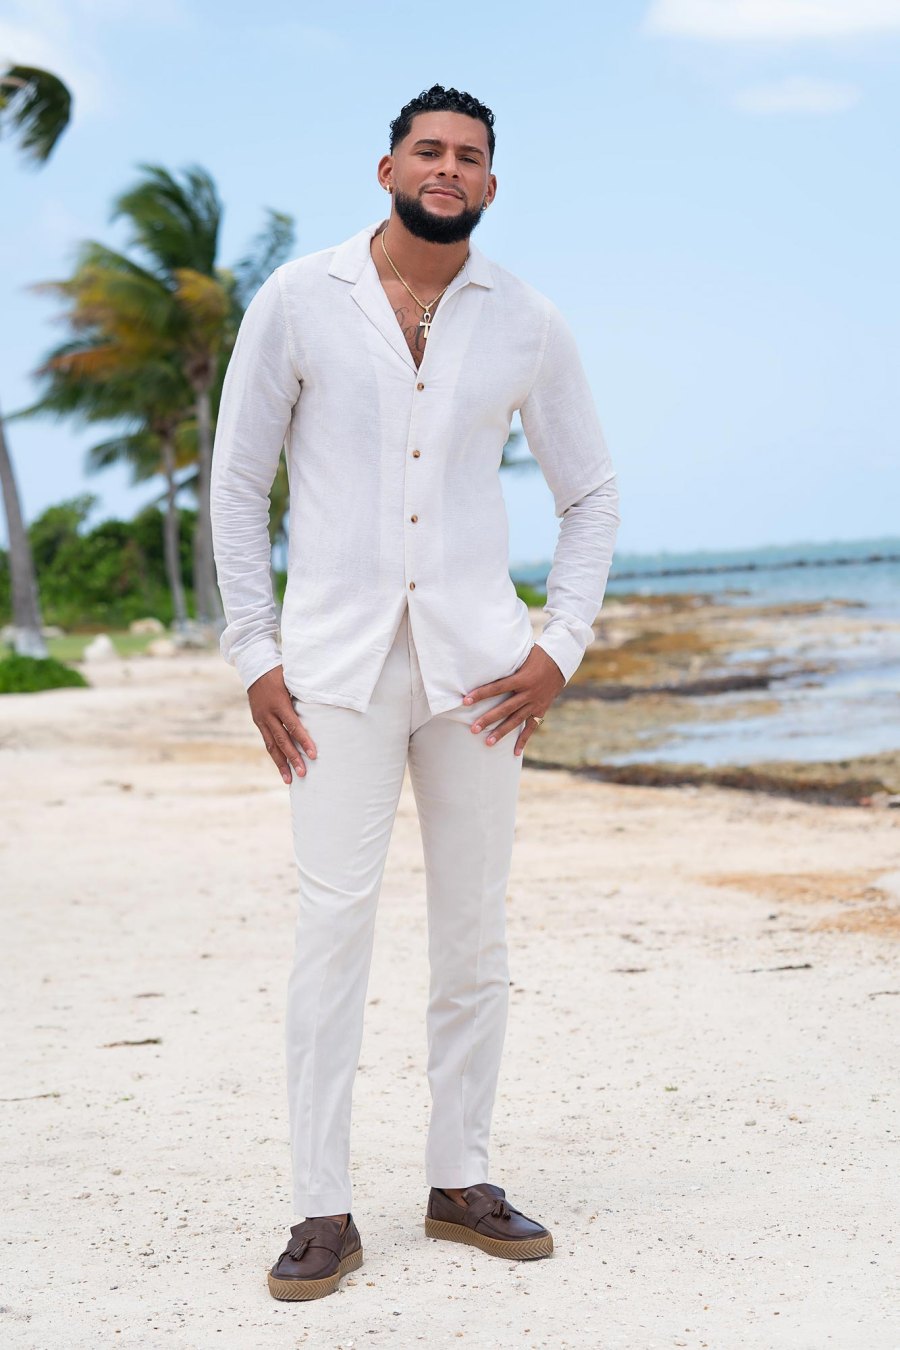 Grand Cayman Secrets in Paradise Cast Reveals Their Biggest Reality TV Lessons — and Regrets 510 Connor Bunney